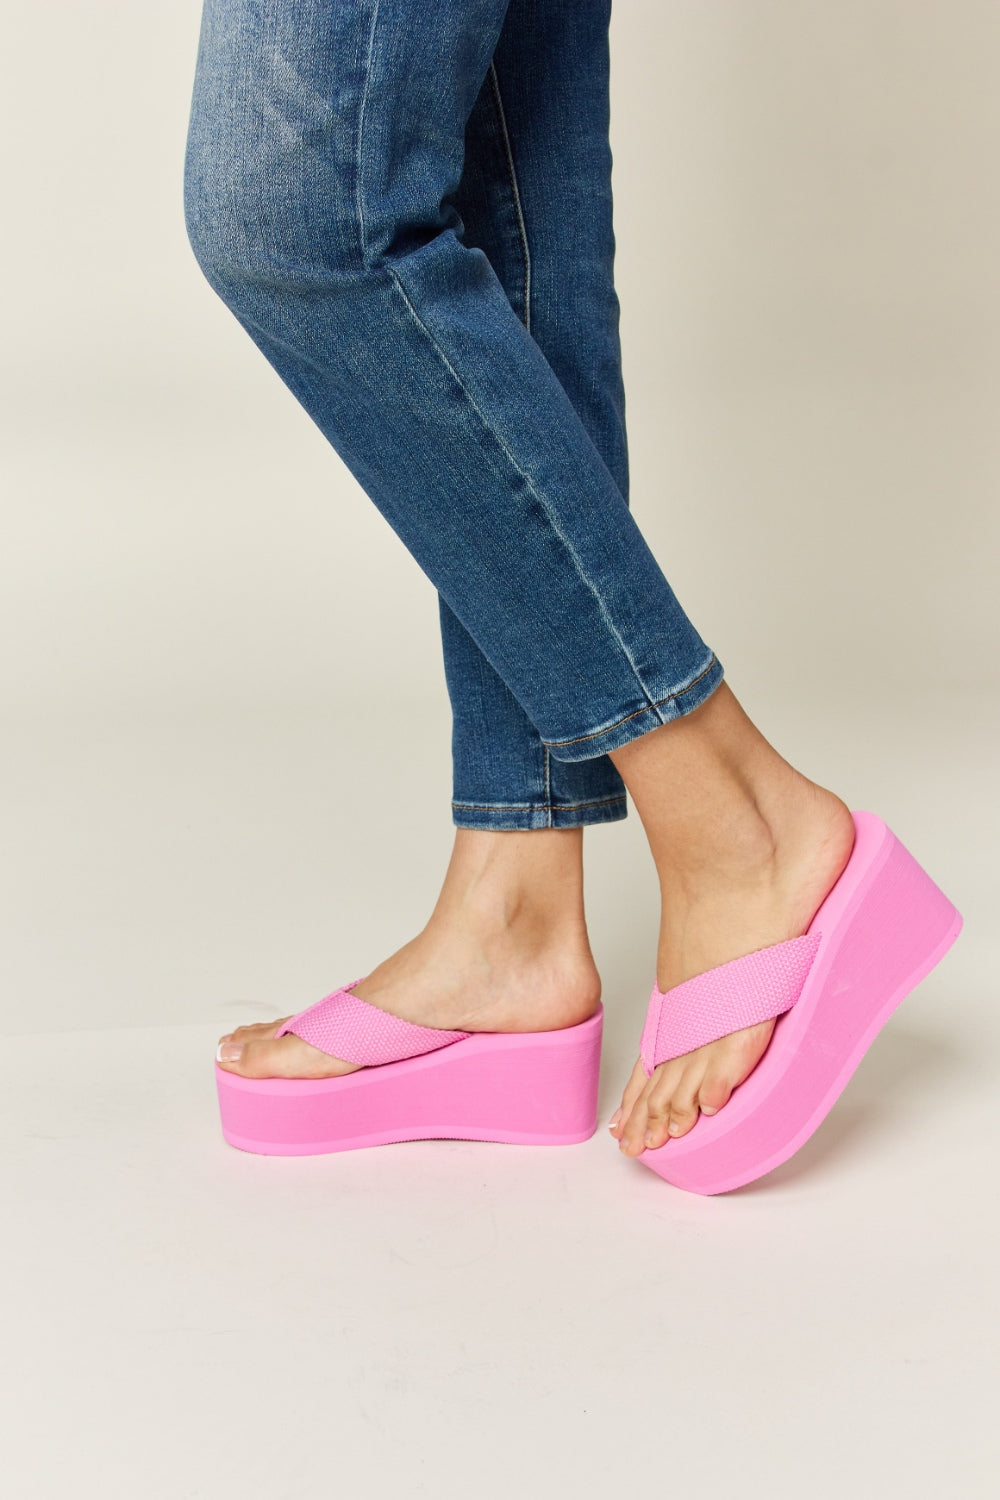 WILD DIVA Platform Wedge Pink Open Toe Chunky Thick Flip Flop Thong Sandals